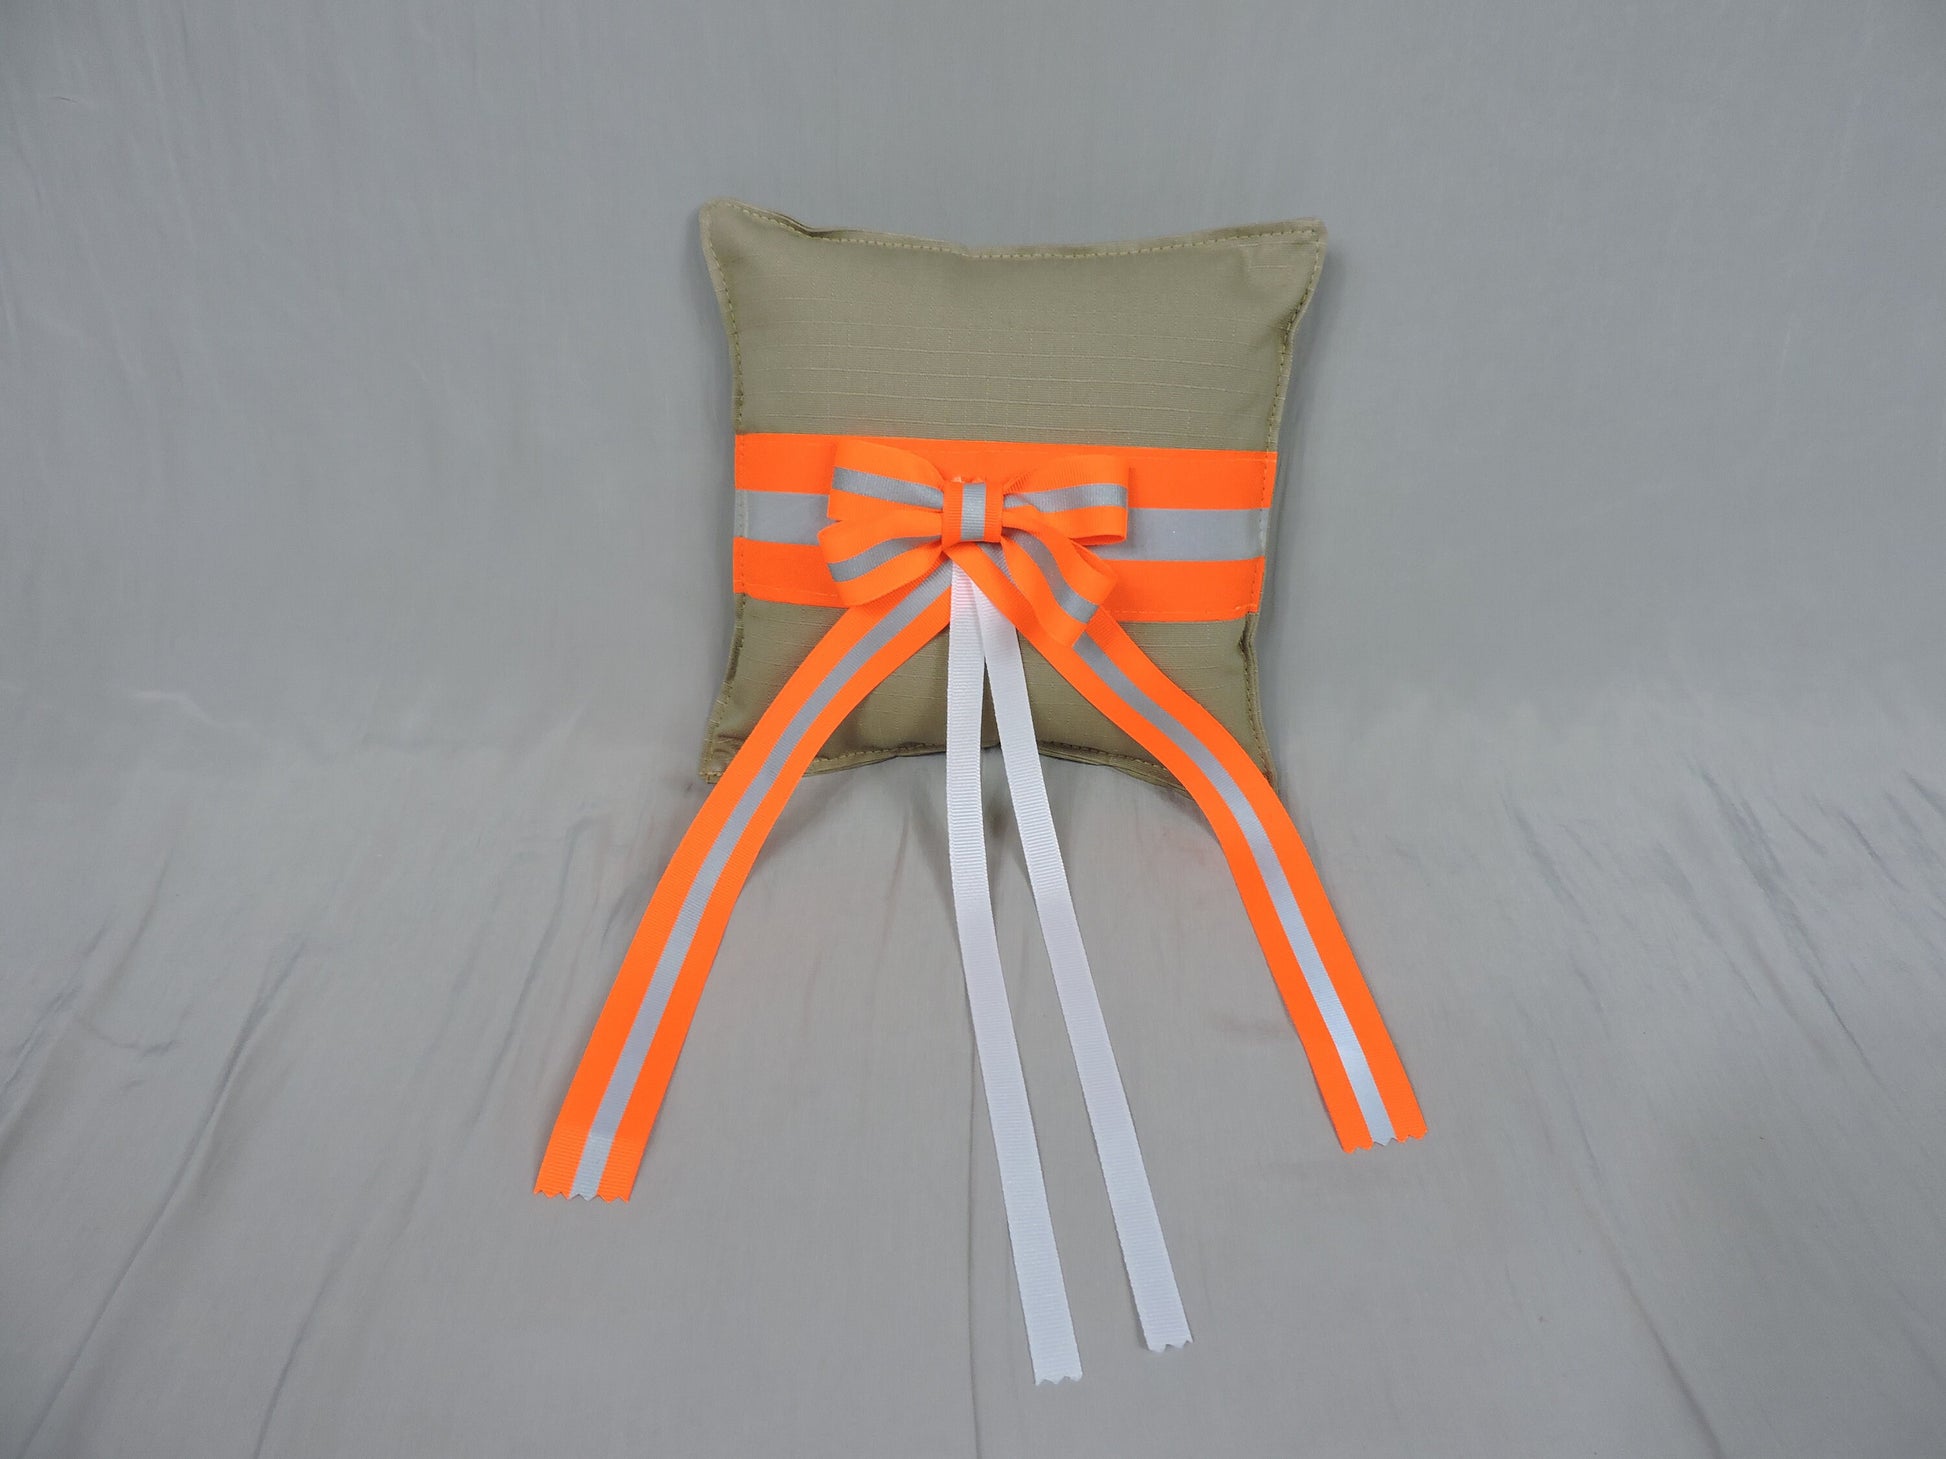 Tan Fabric and Neon Orange Reflective Tape Firefighter wedding Ring Bearer Pillow